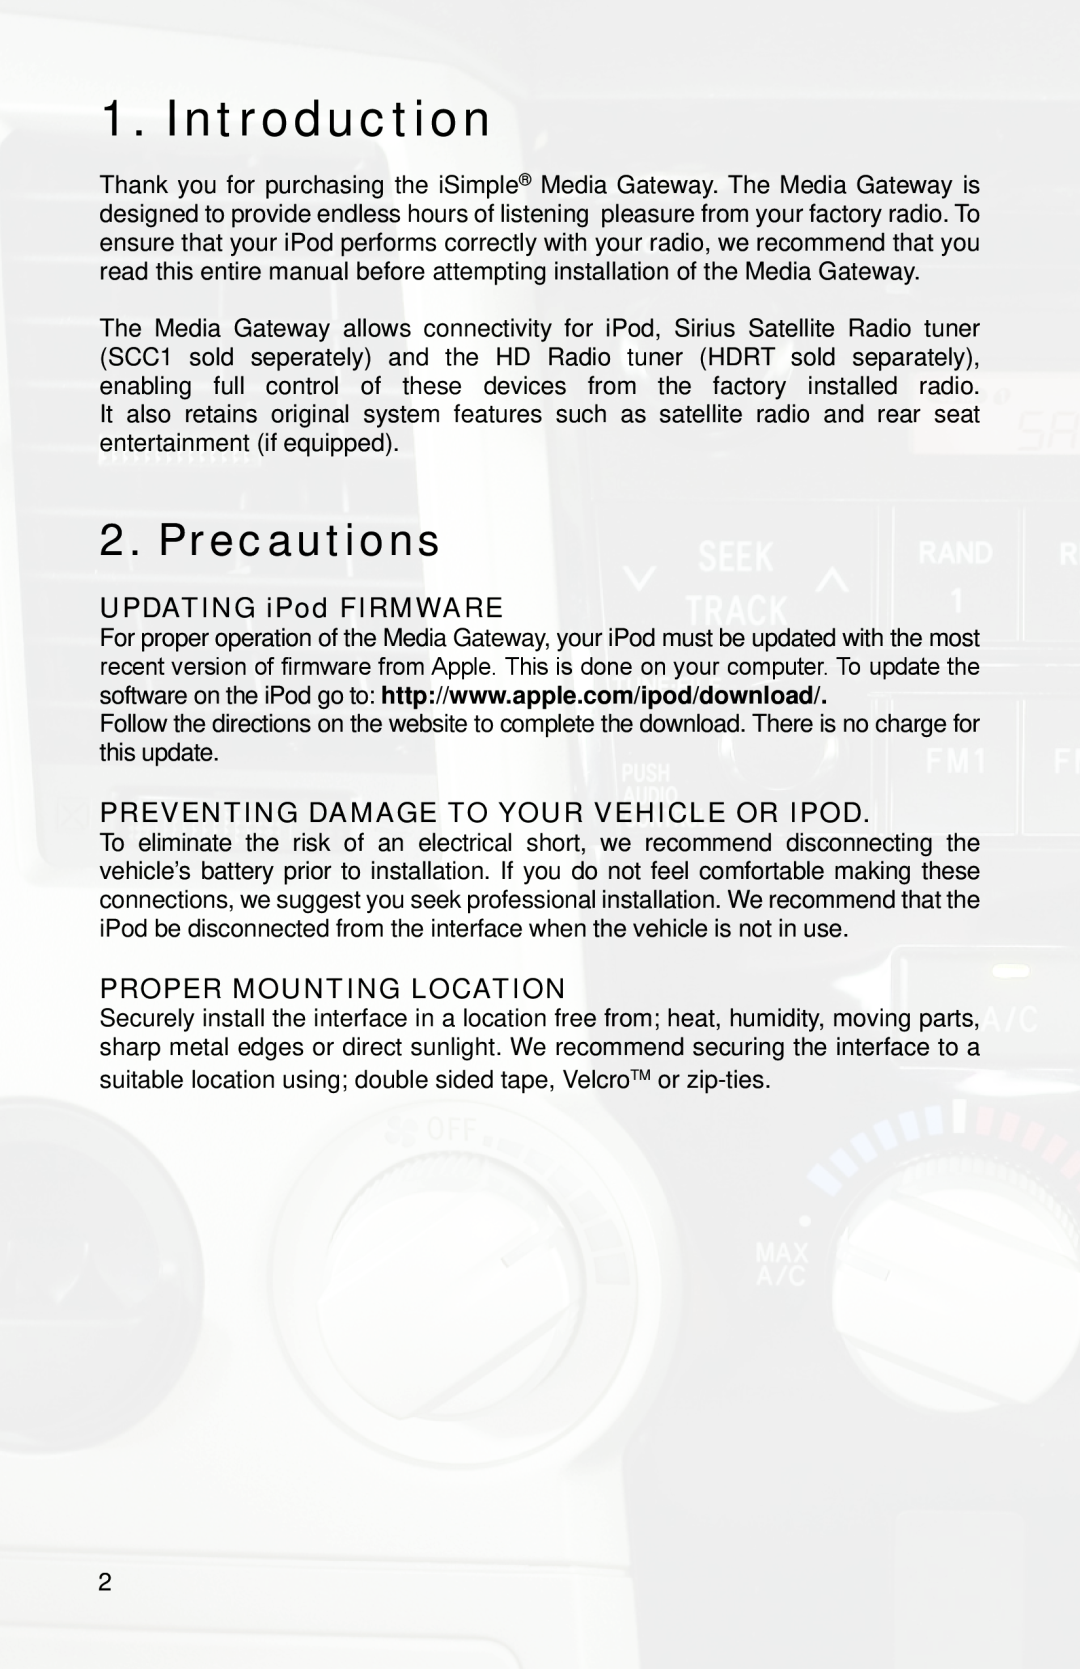 iSimple PGHTY1 owner manual Introduction, Precautions, UPDATING iPod FIRMWARE, PREVENTING DAMAGE TO YOUR VEHICLE OR iPod 